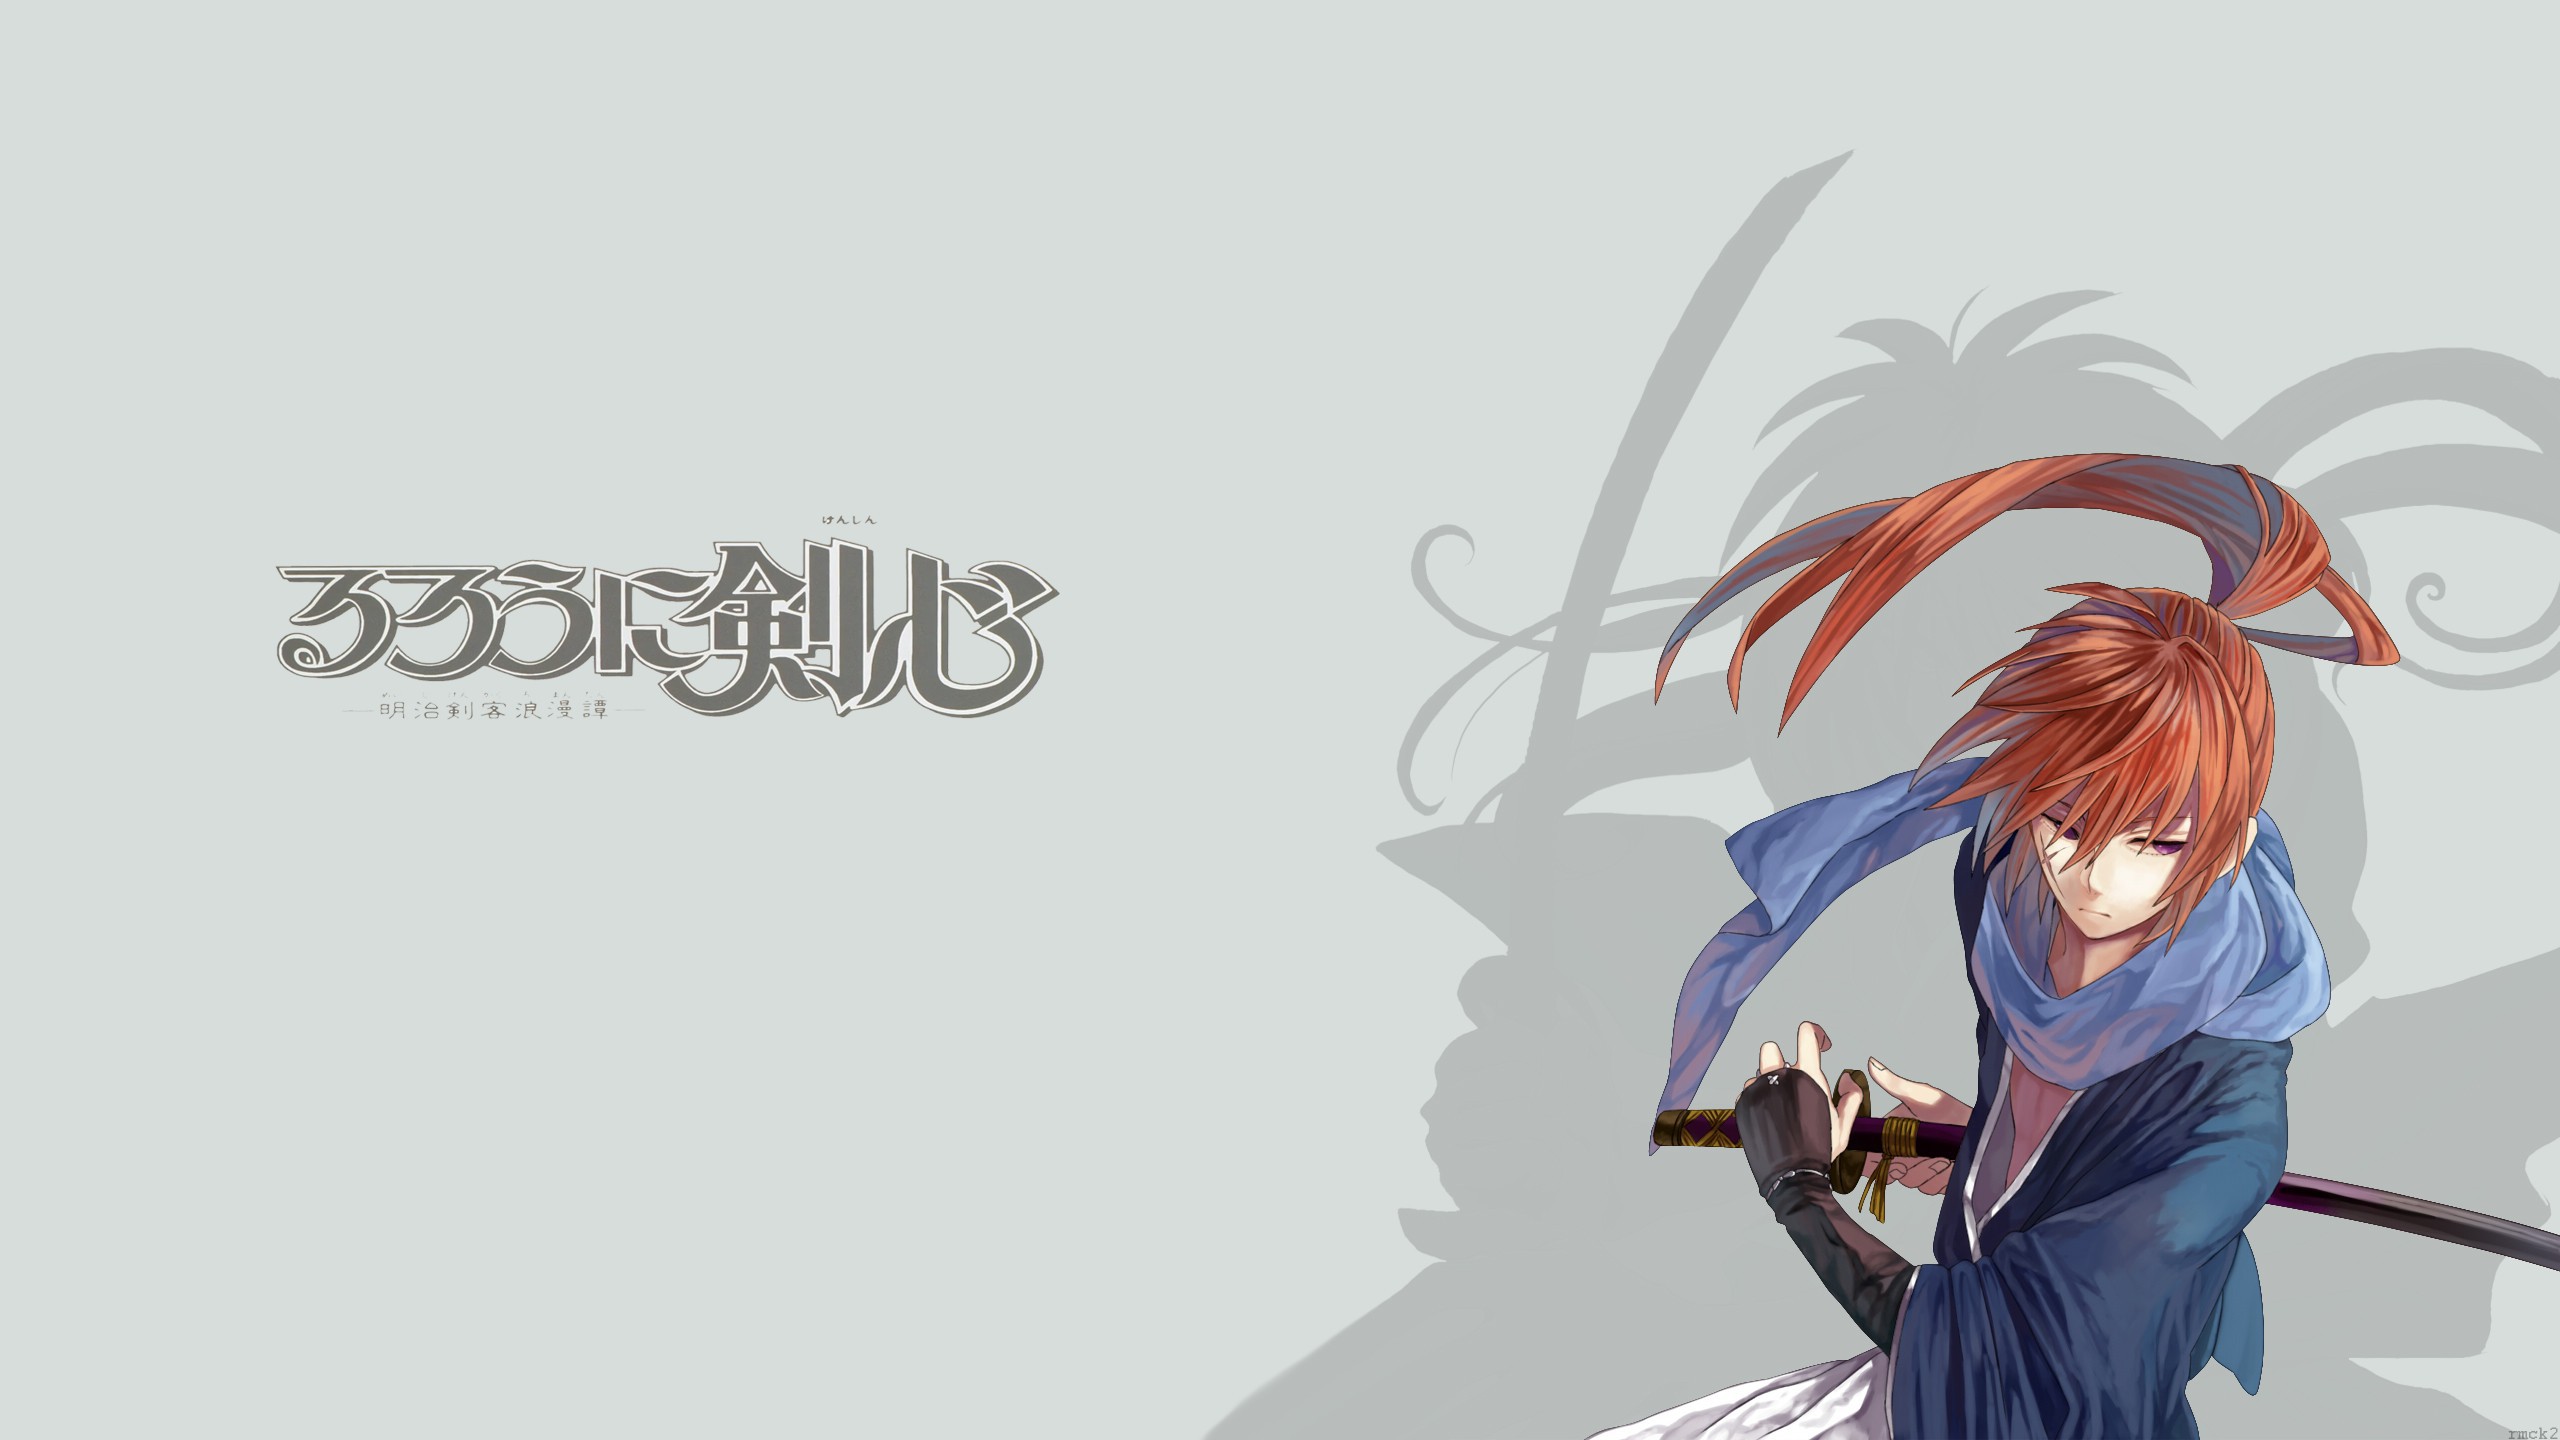 The girl from the anime Samurai X wallpapers and images ...